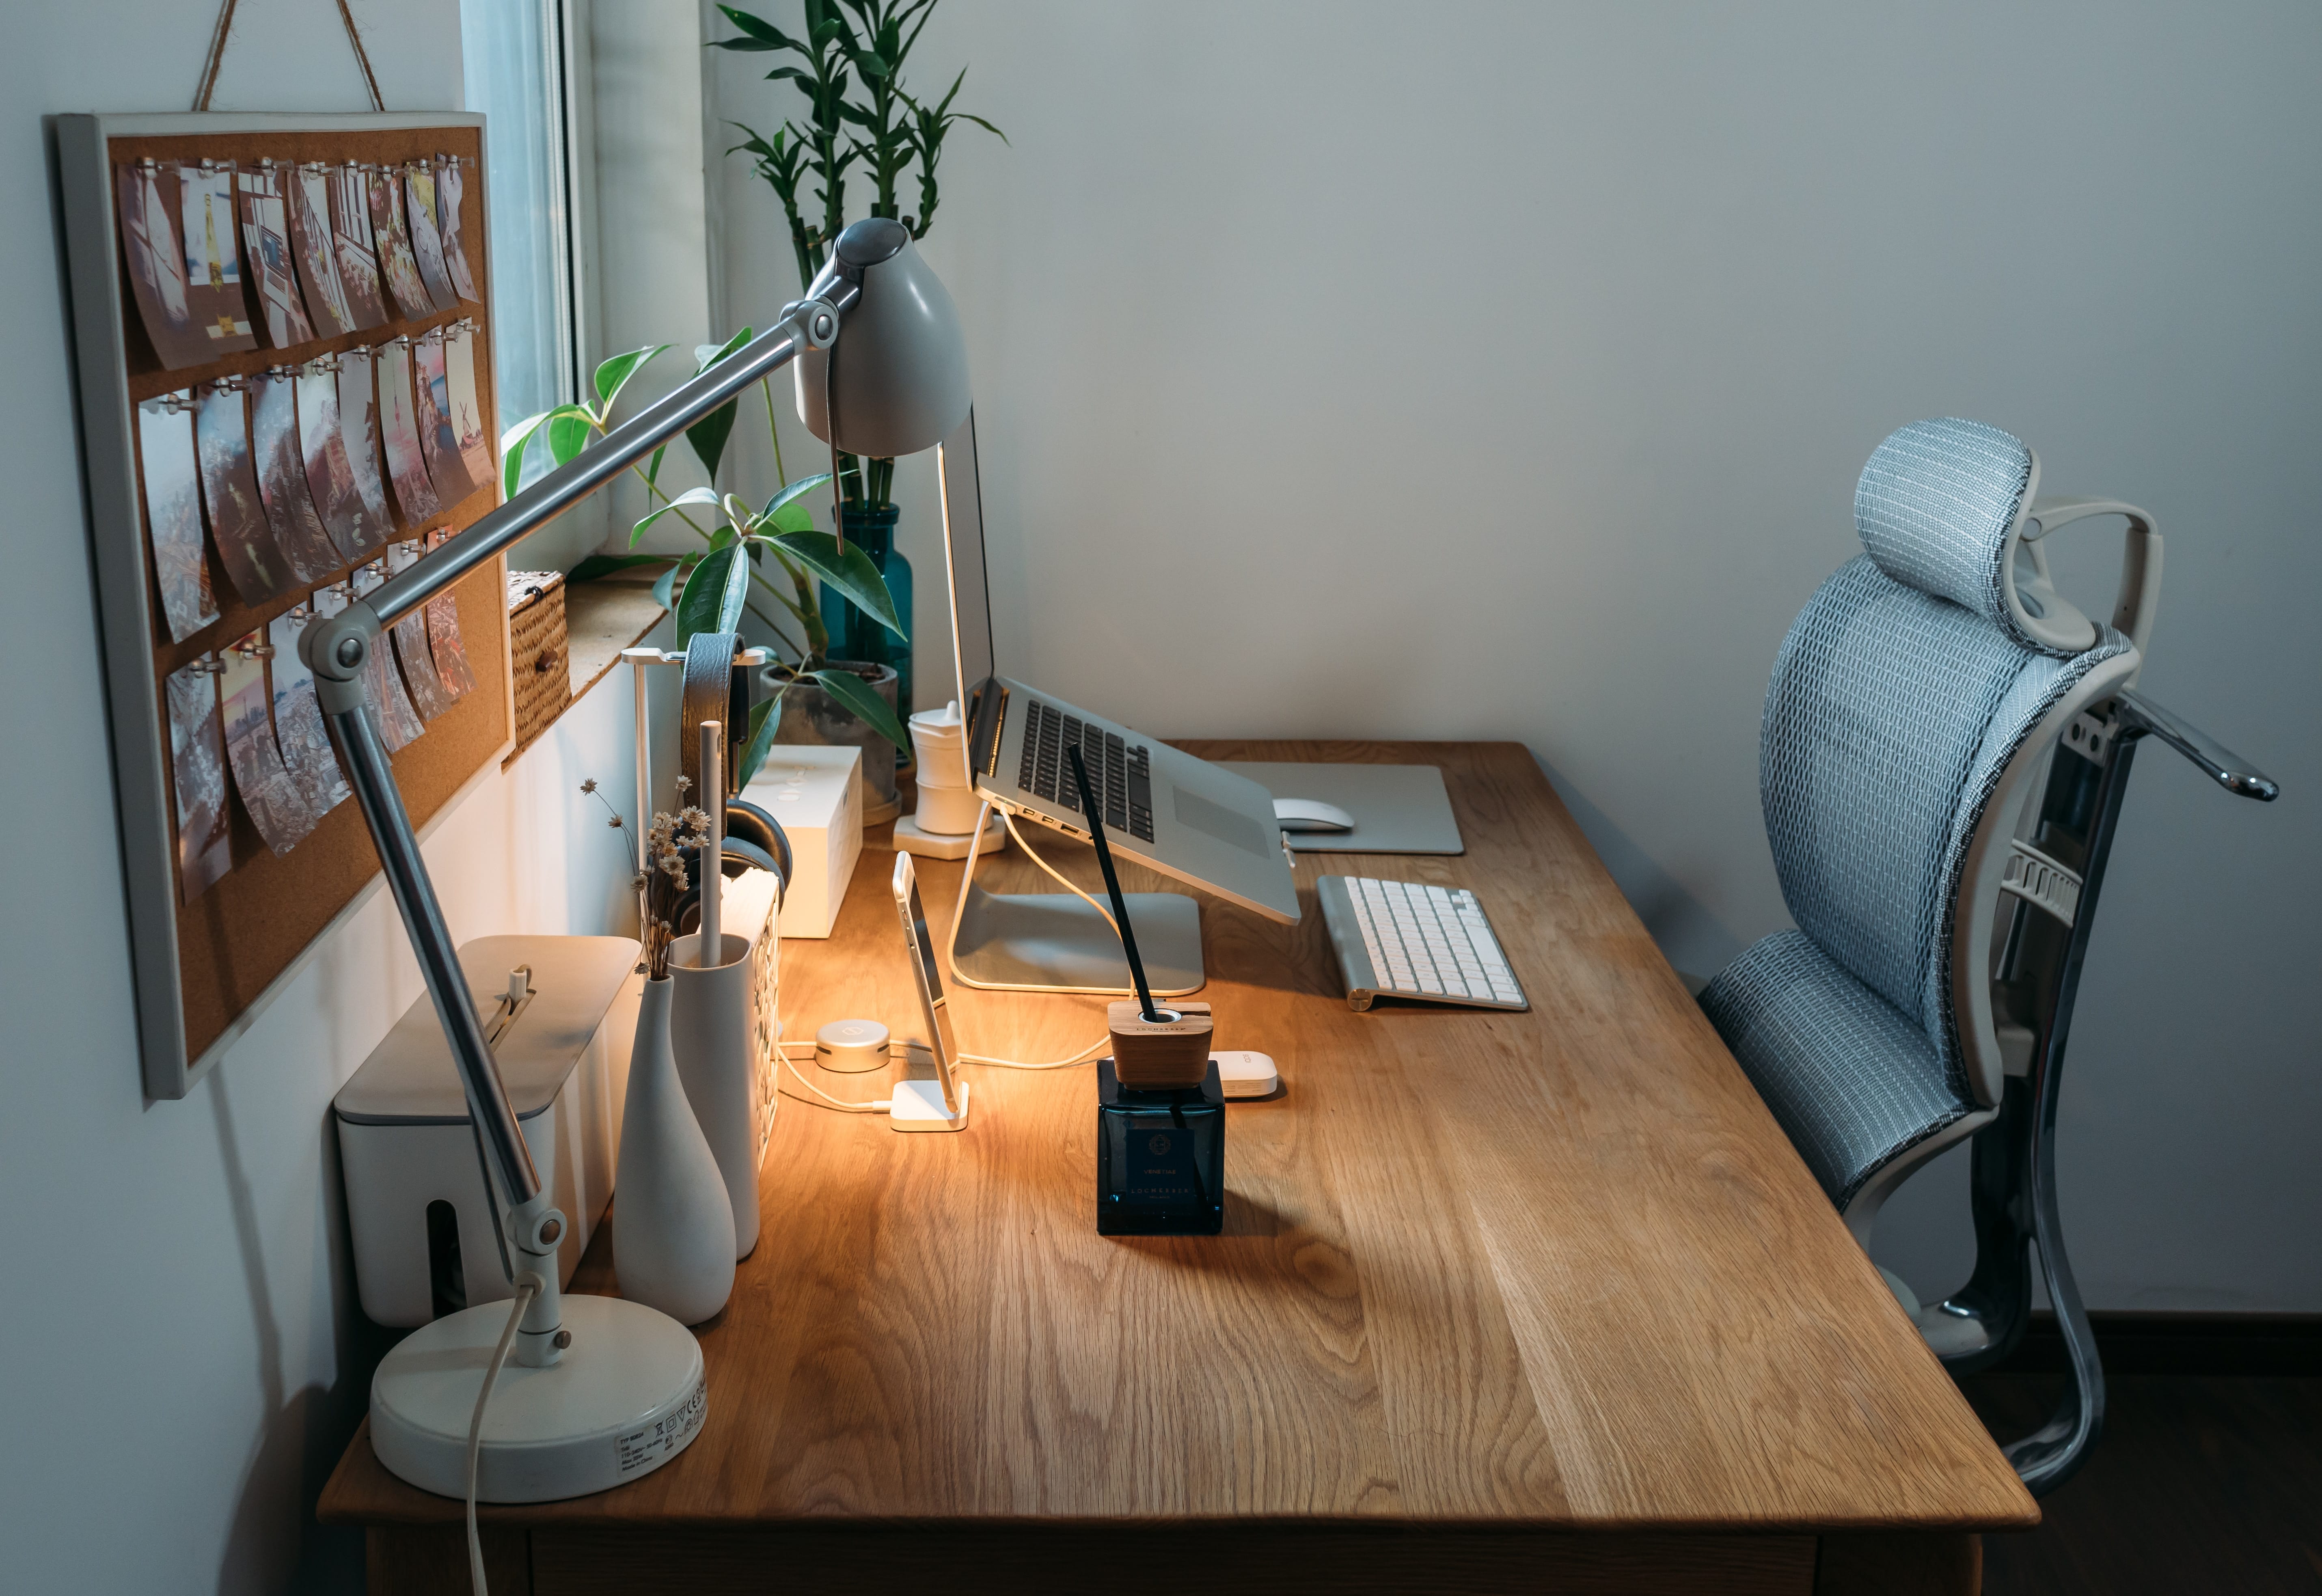 Desk with computer, lamp, and personal effects; image by Samule Sun, via Unsplash.com.